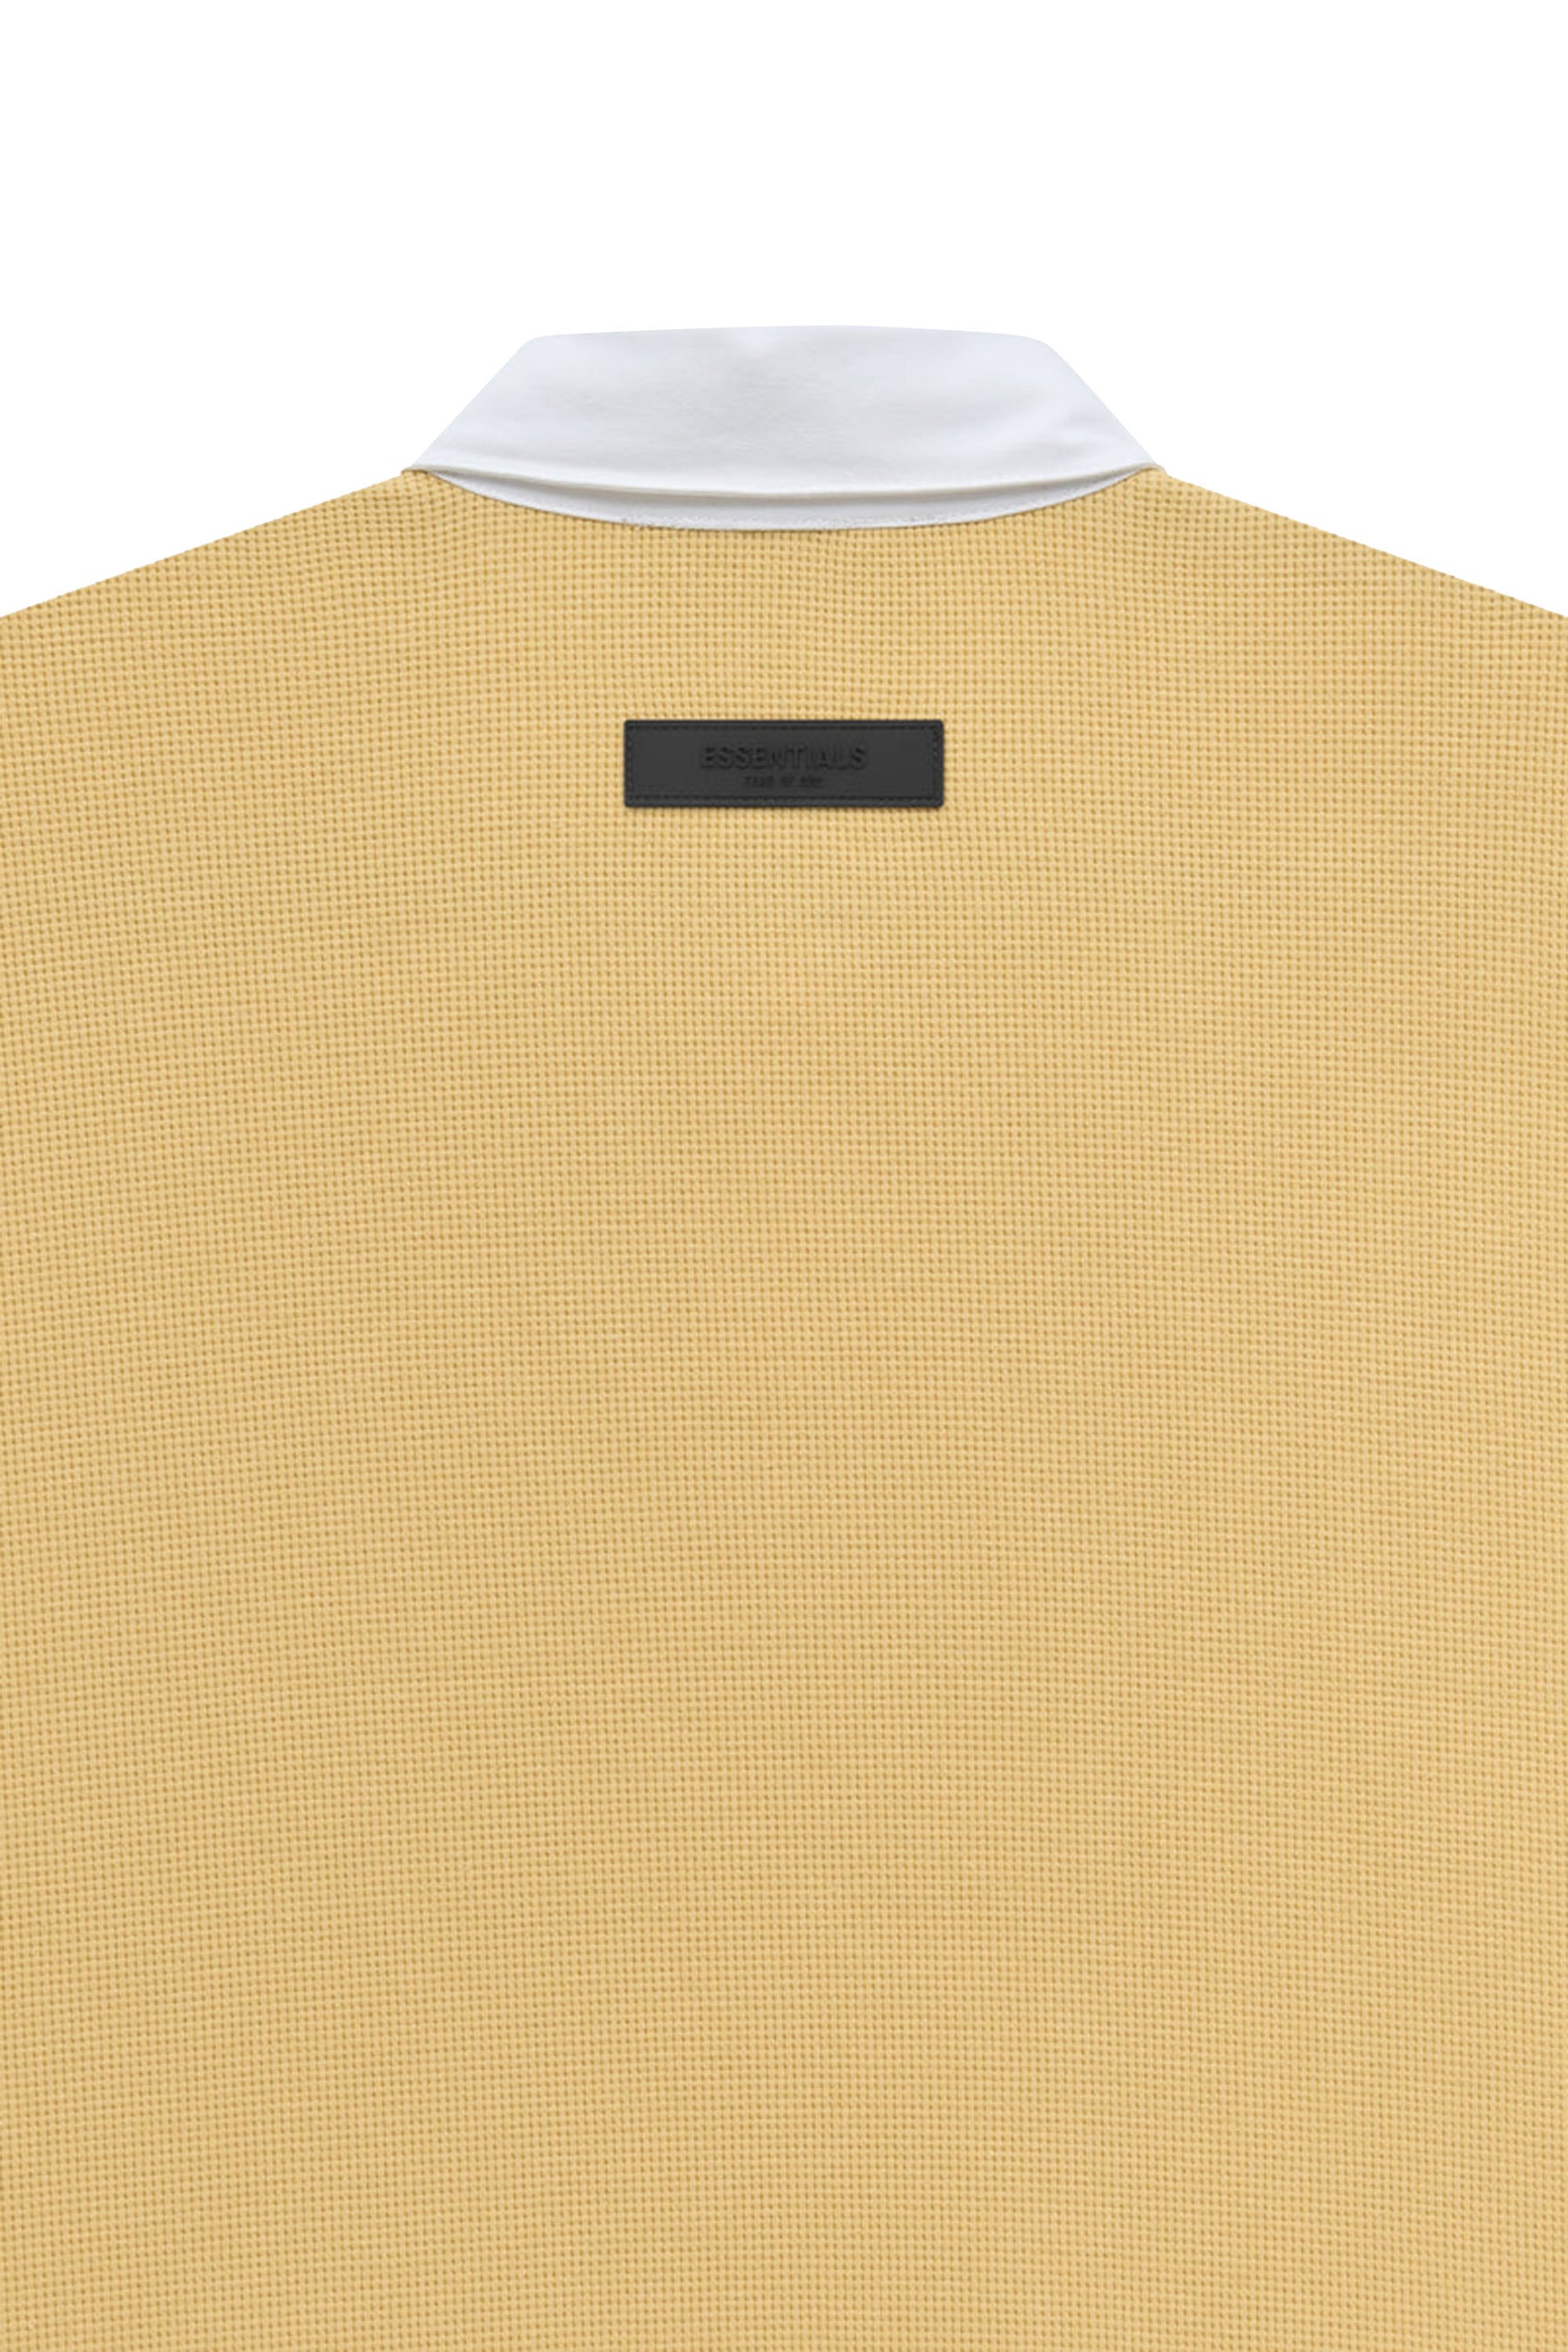 HENLEY RUGBY / LIGHT TUSCAN